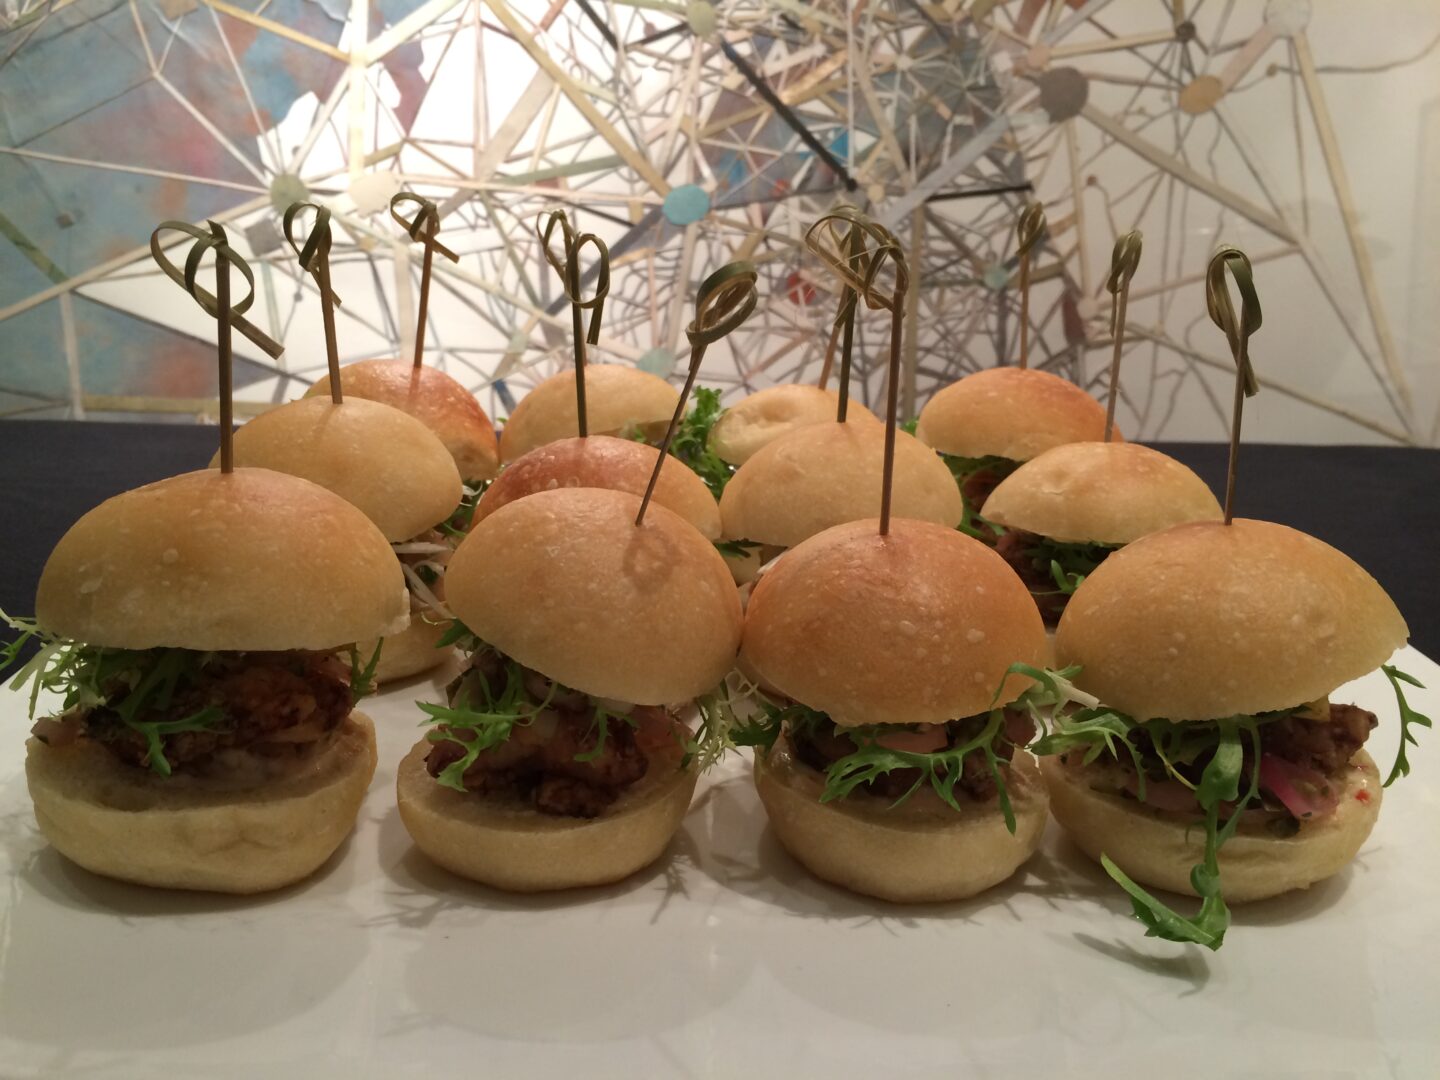 A plate with several sliders on it.